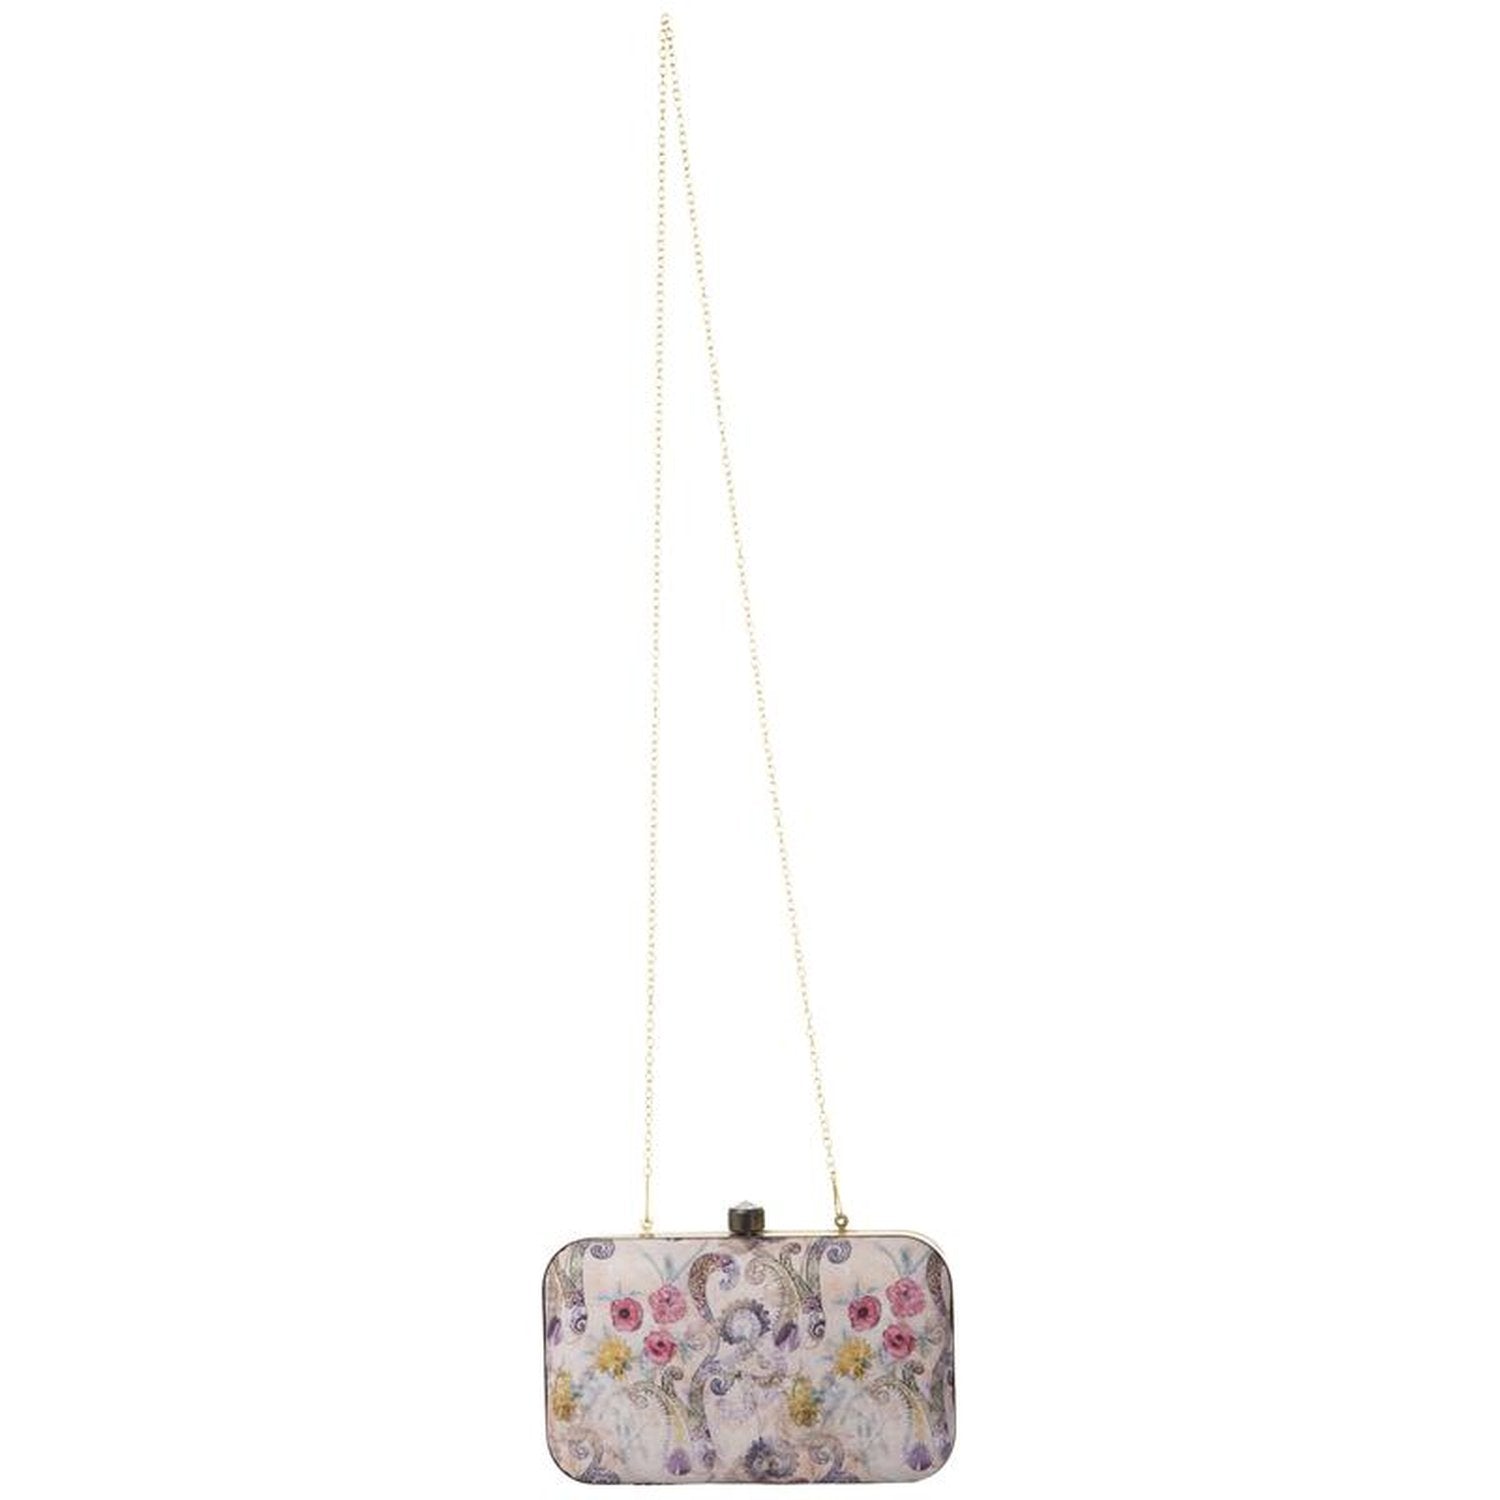 Norah Collection Women''s Evening Party Clutch Wallet with Chain Strap  Beads Work Floral Design at Rs 1699/piece in Mumbai